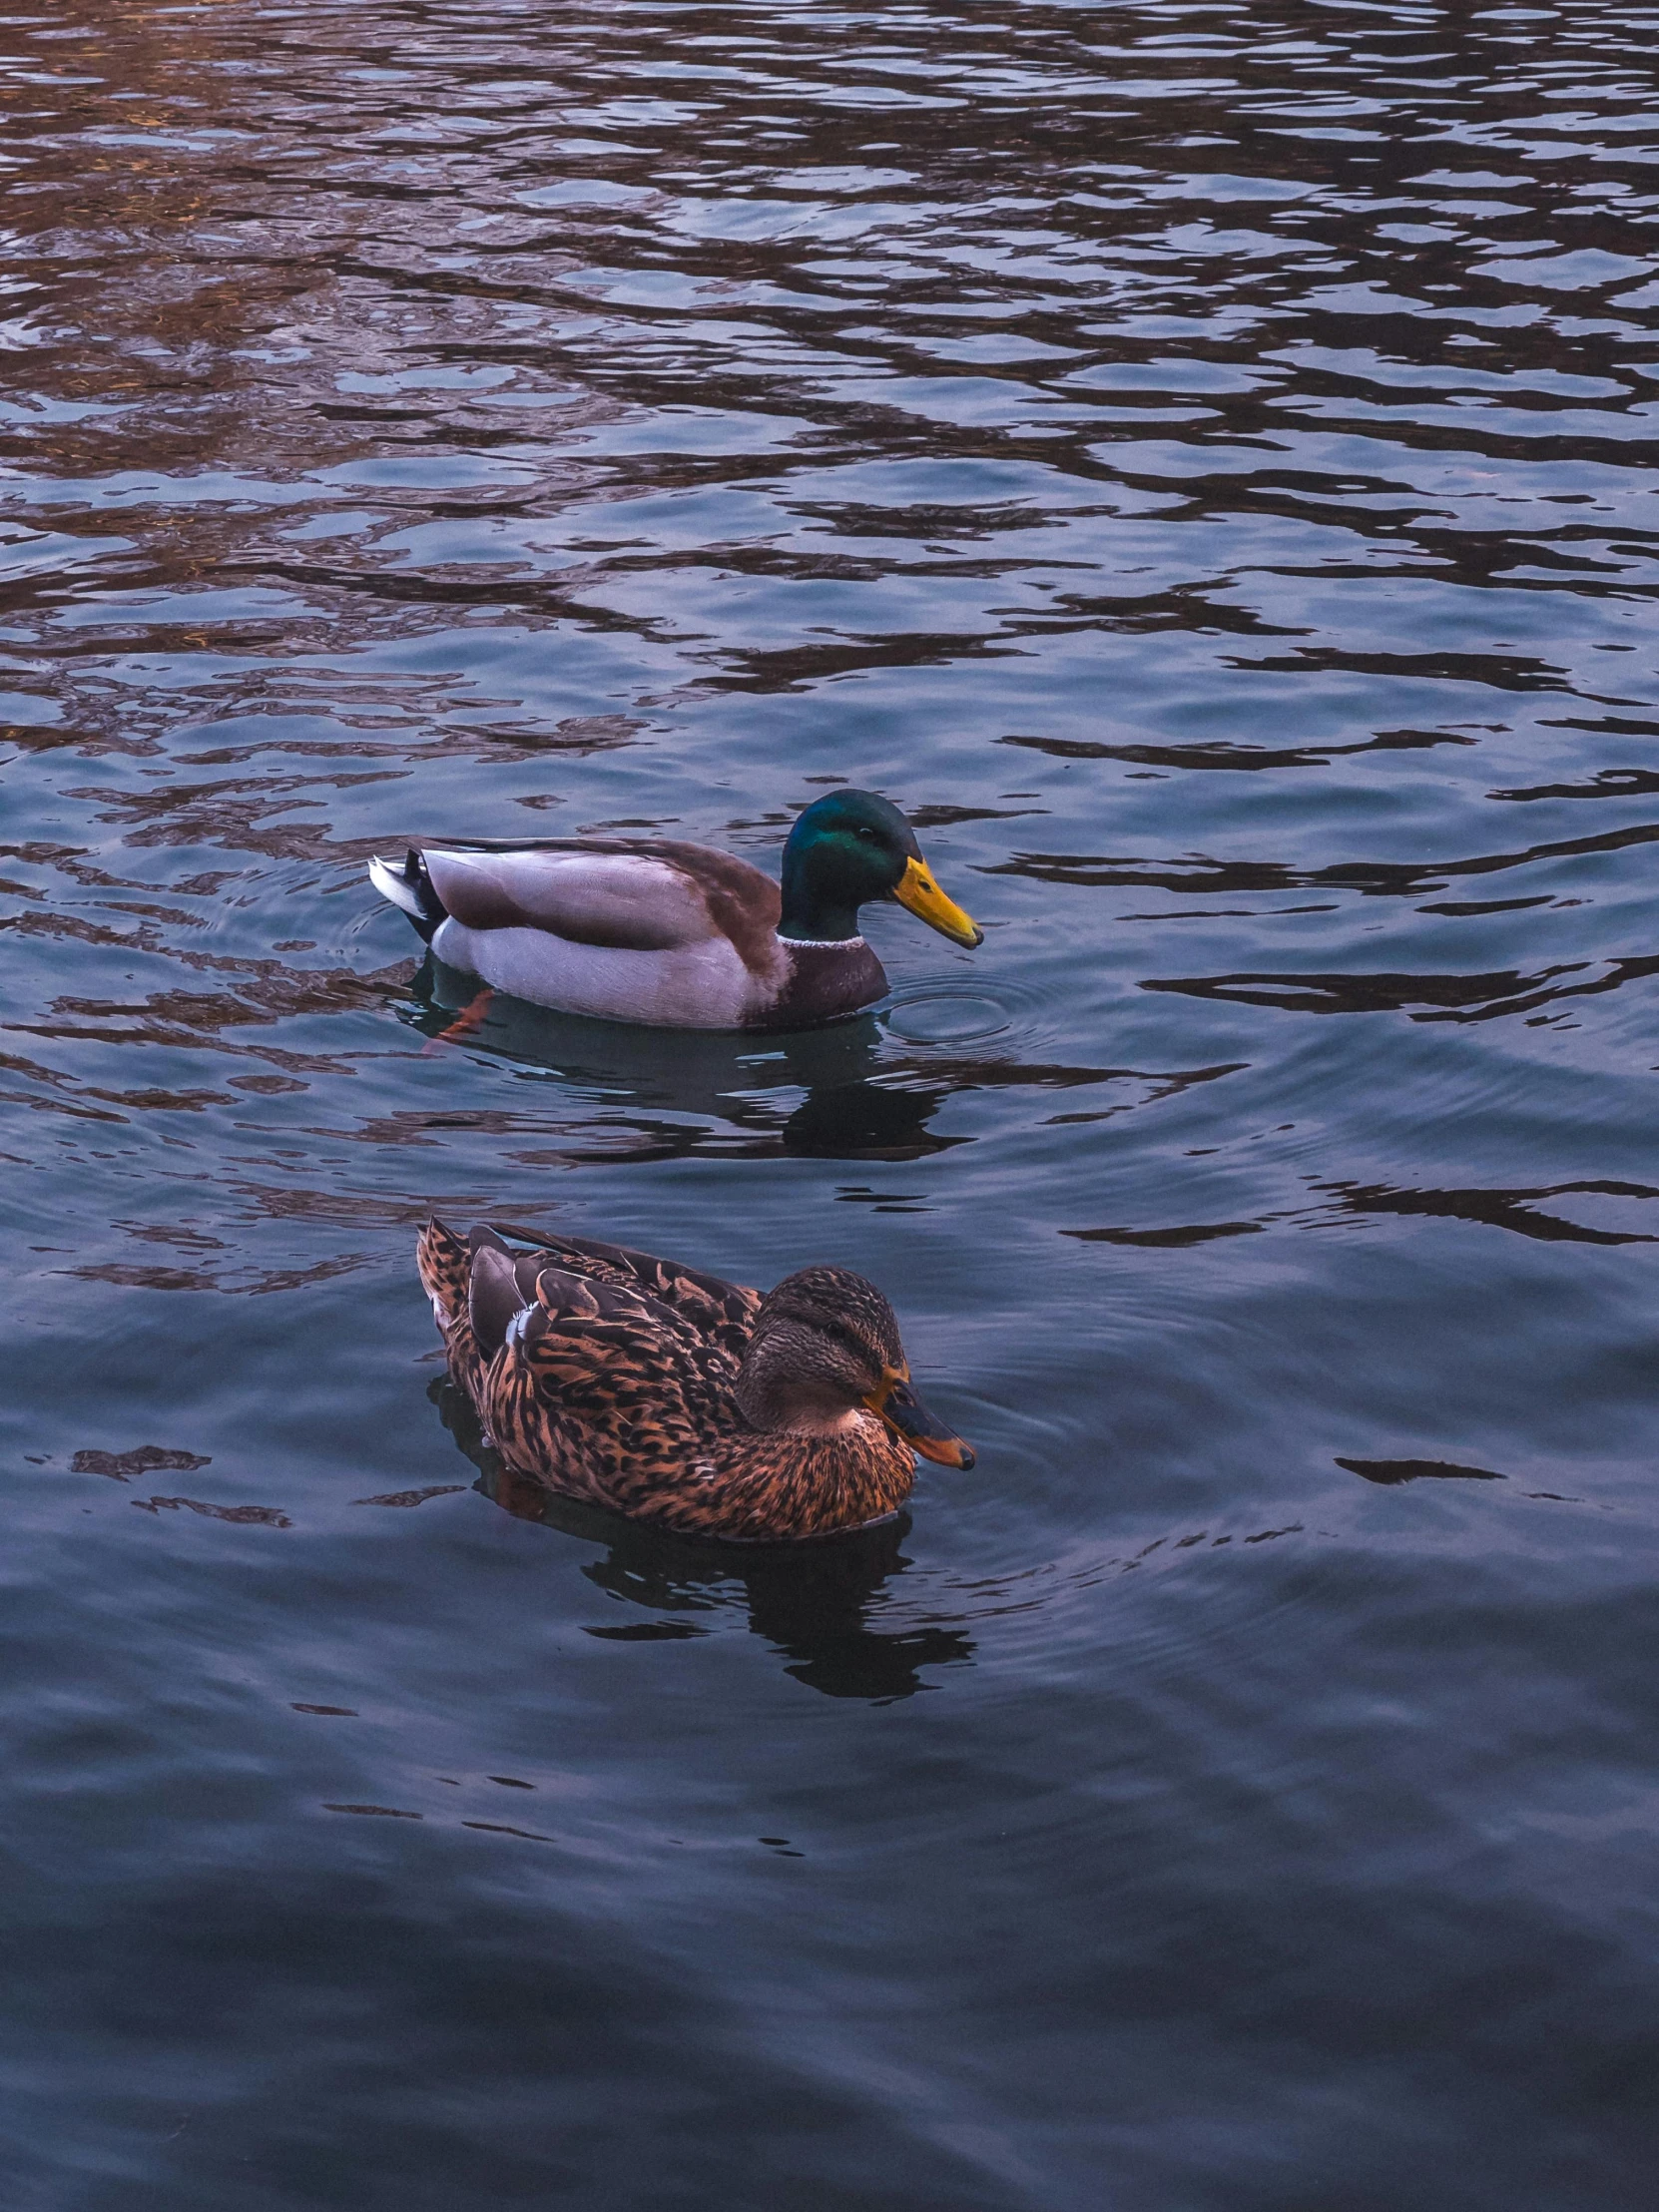 two ducks swimming in a lake at sunset